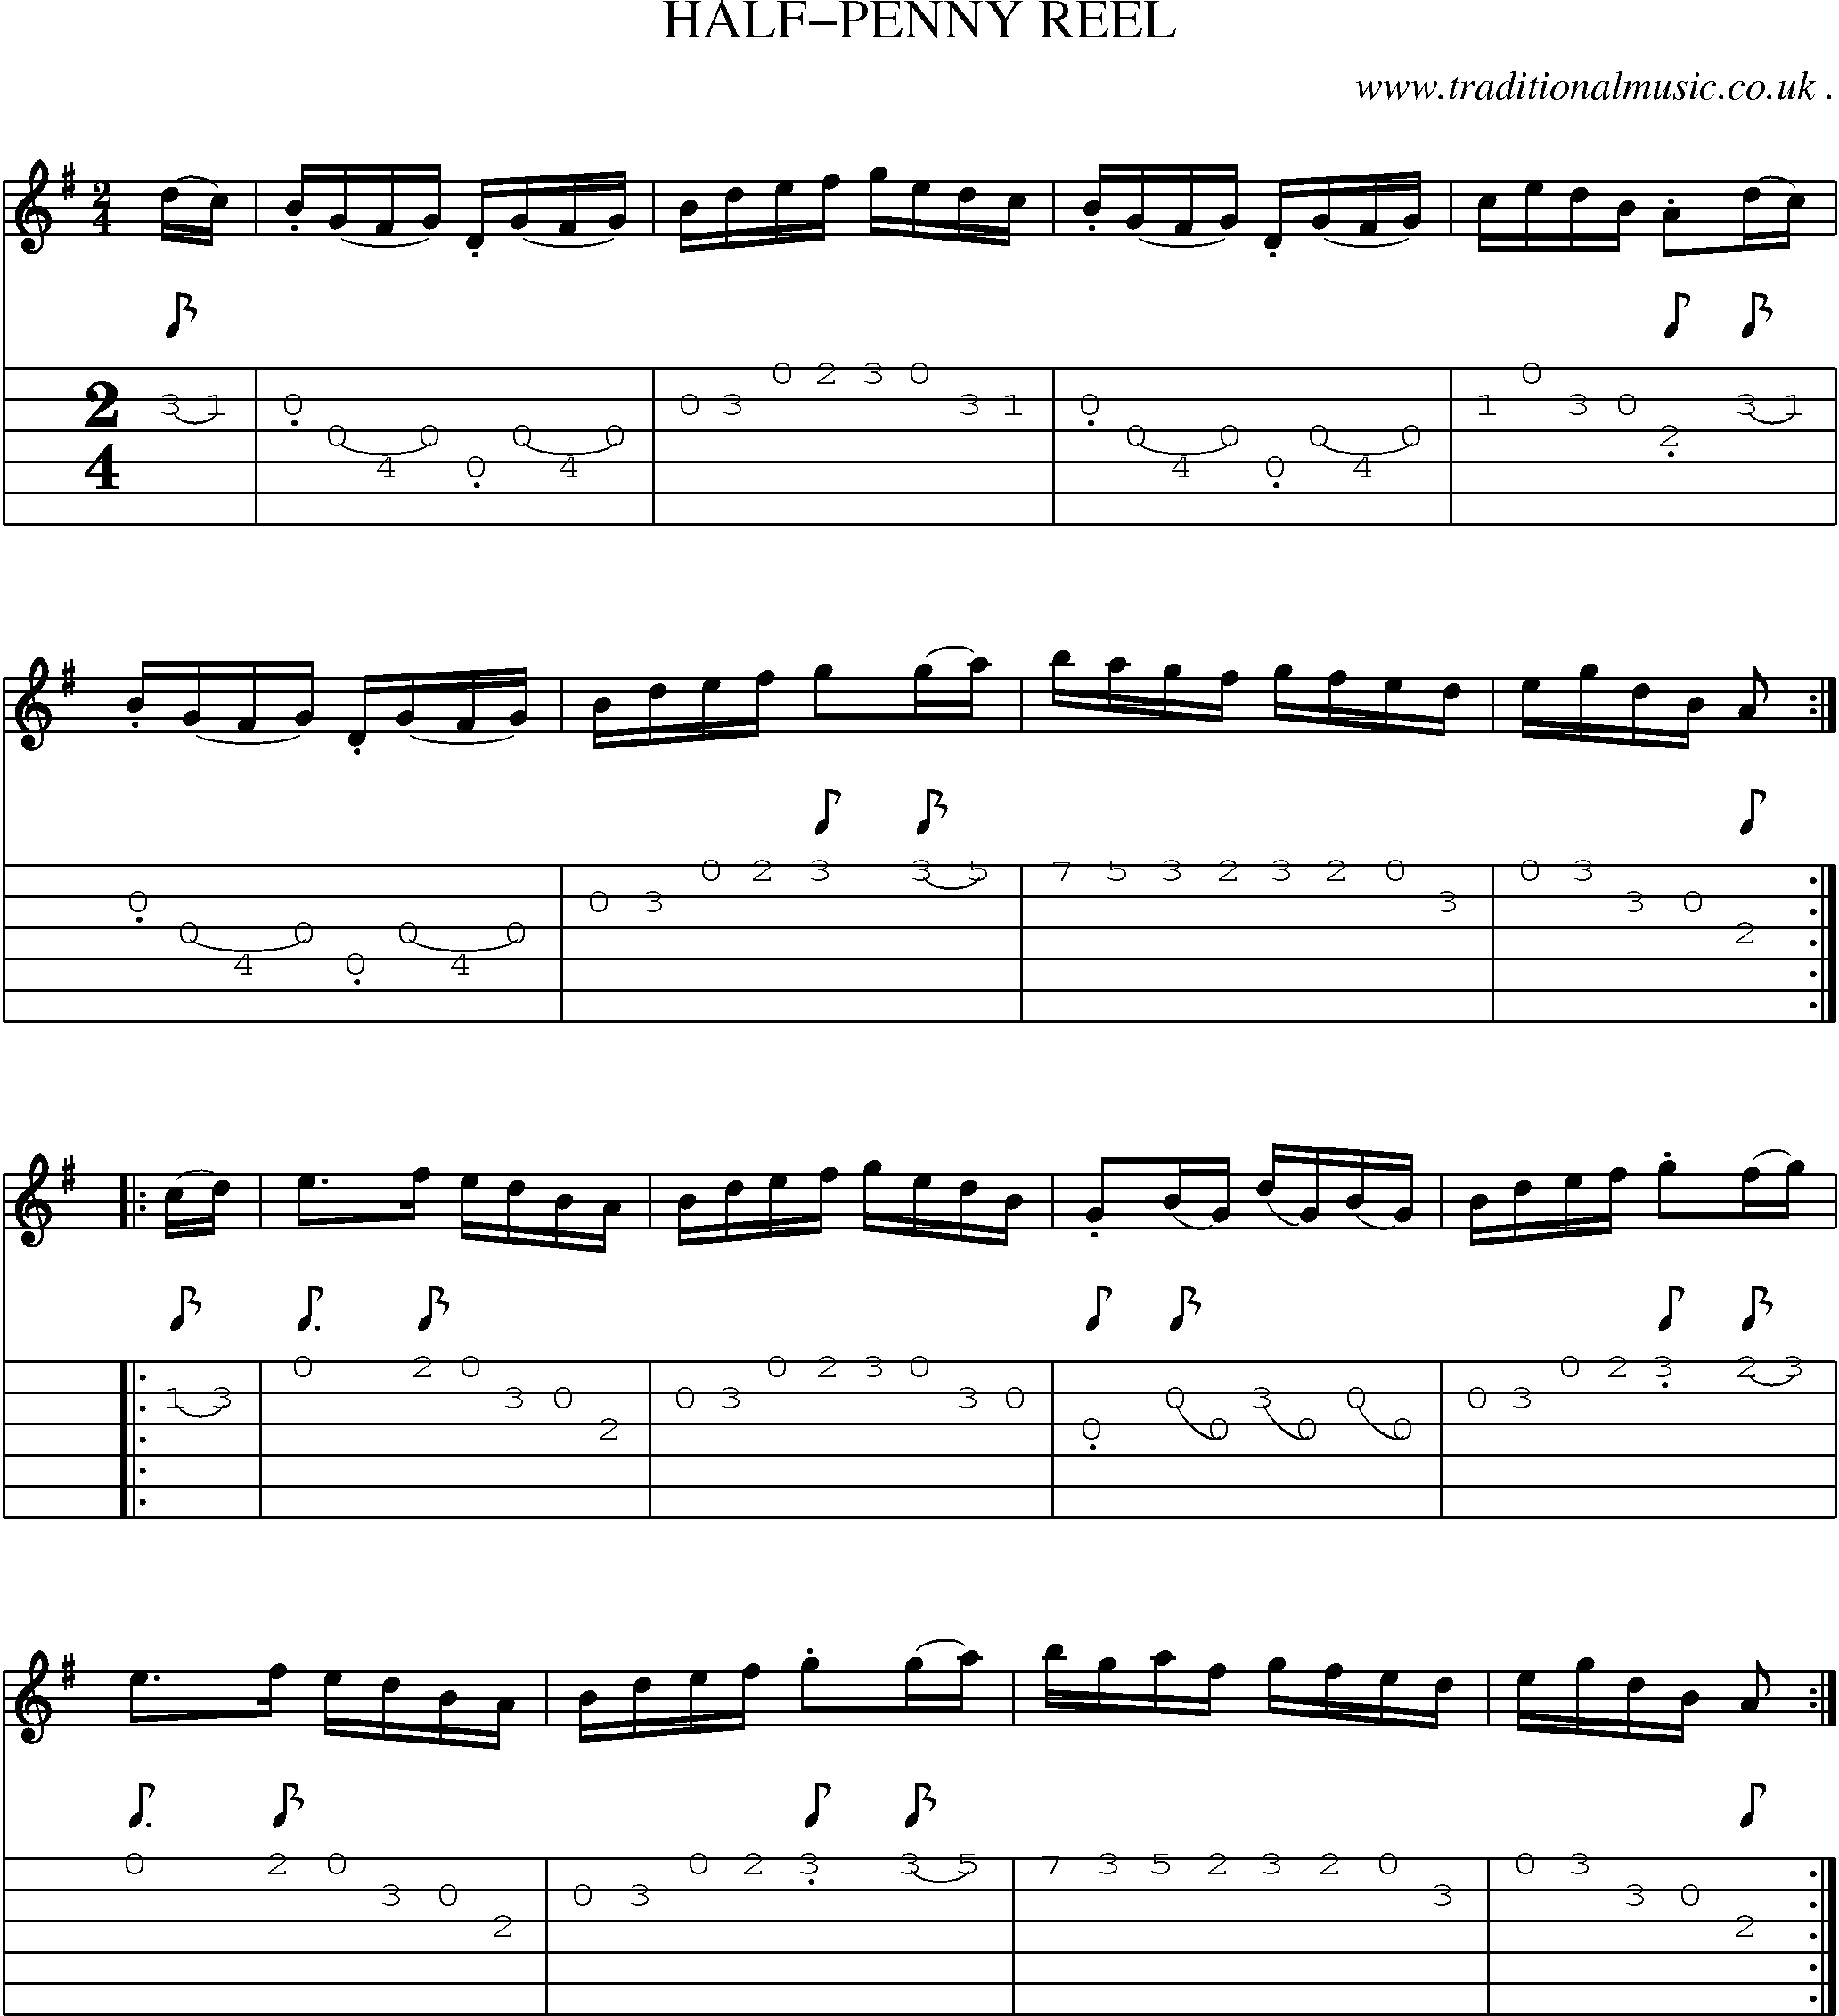 Sheet-Music and Guitar Tabs for Half-penny Reel